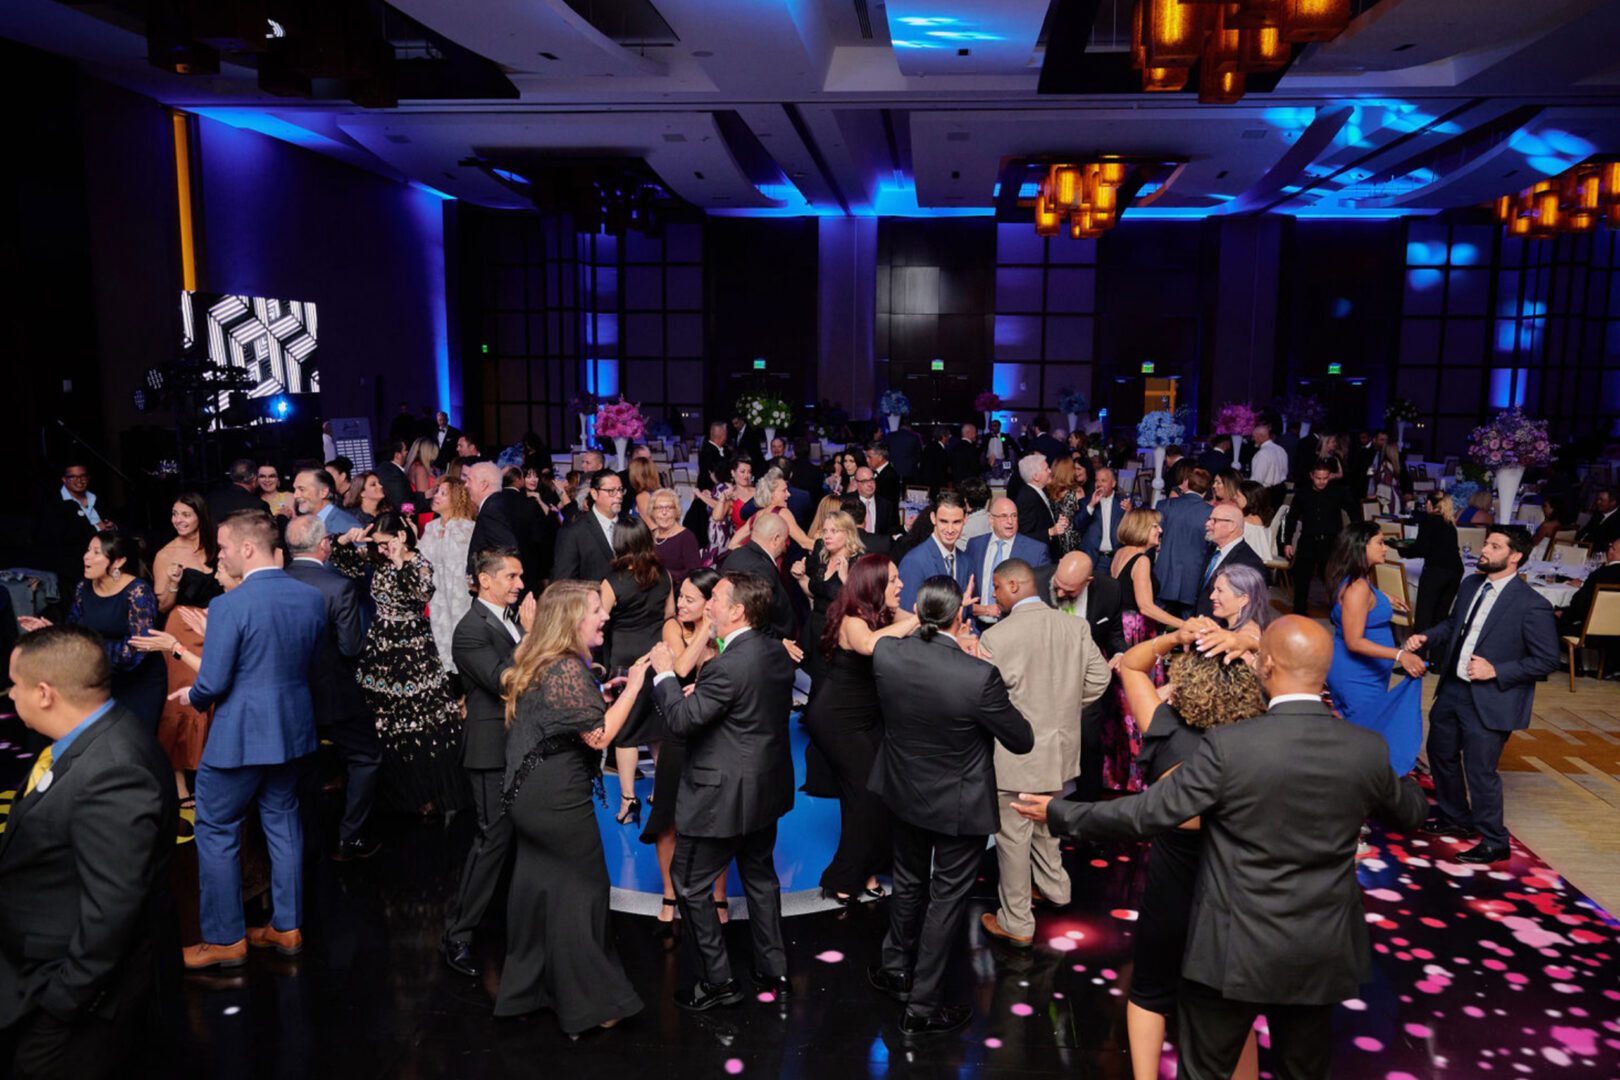 People dancing at an event